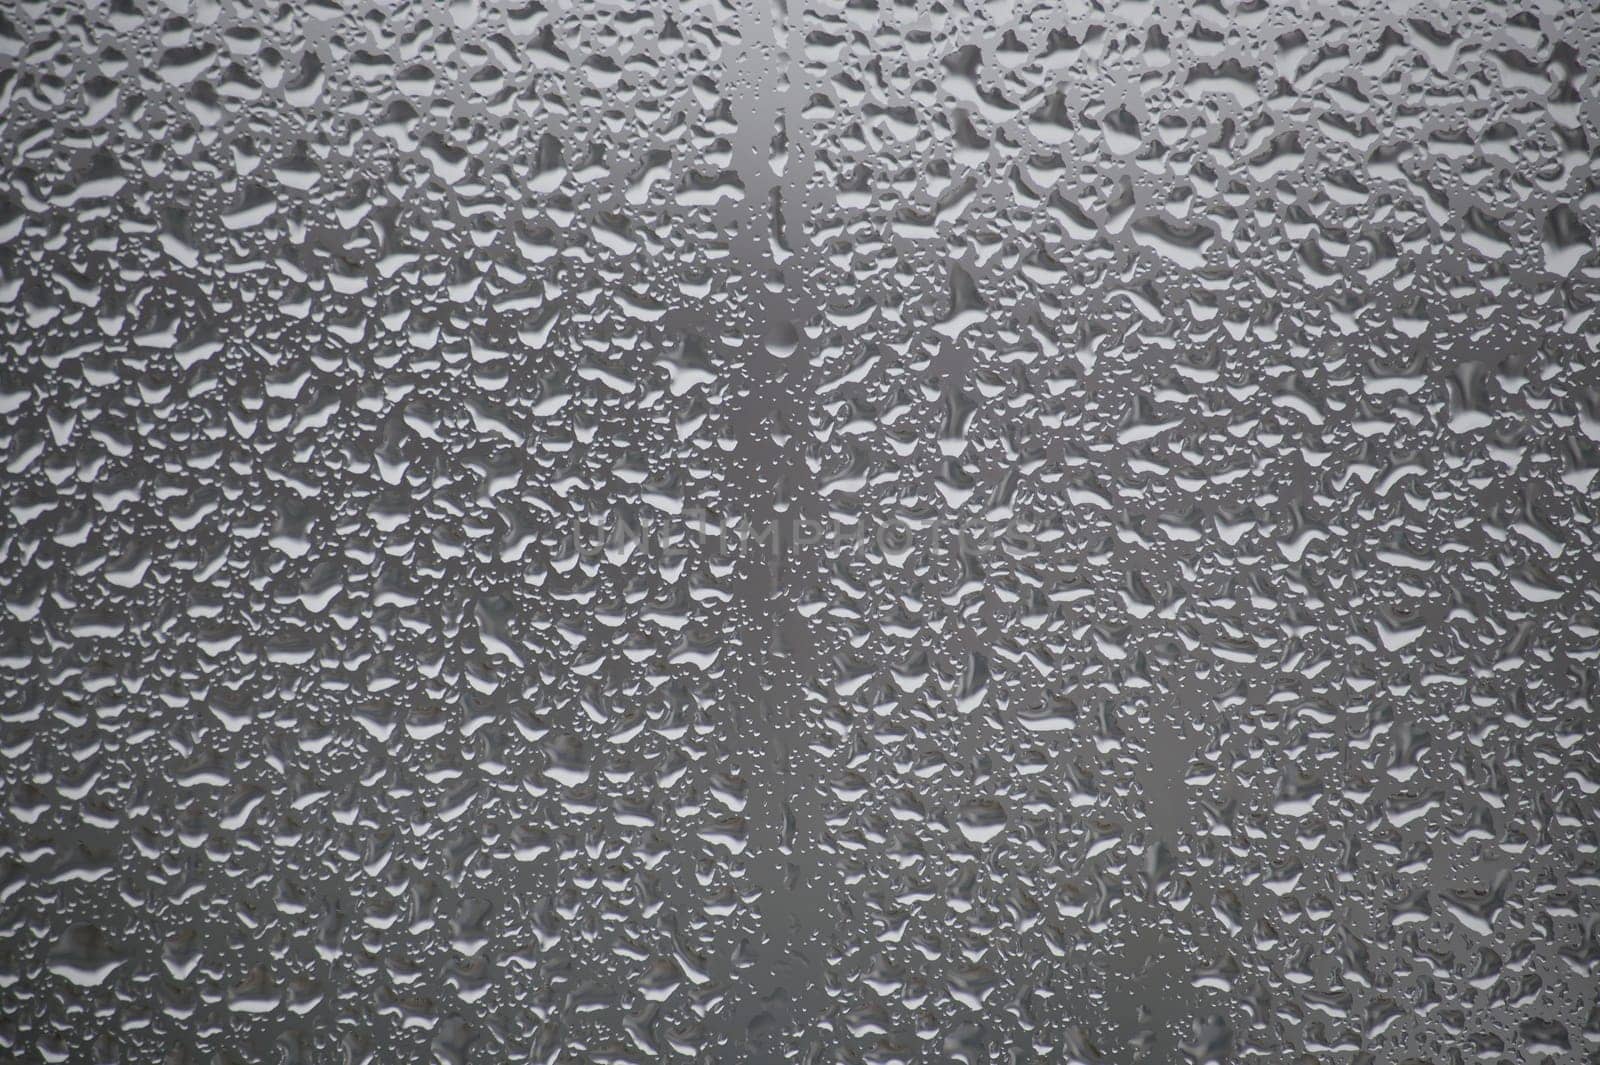 Close-up view of a glass surface covered with many water droplets of various sizes, creating a textured pattern